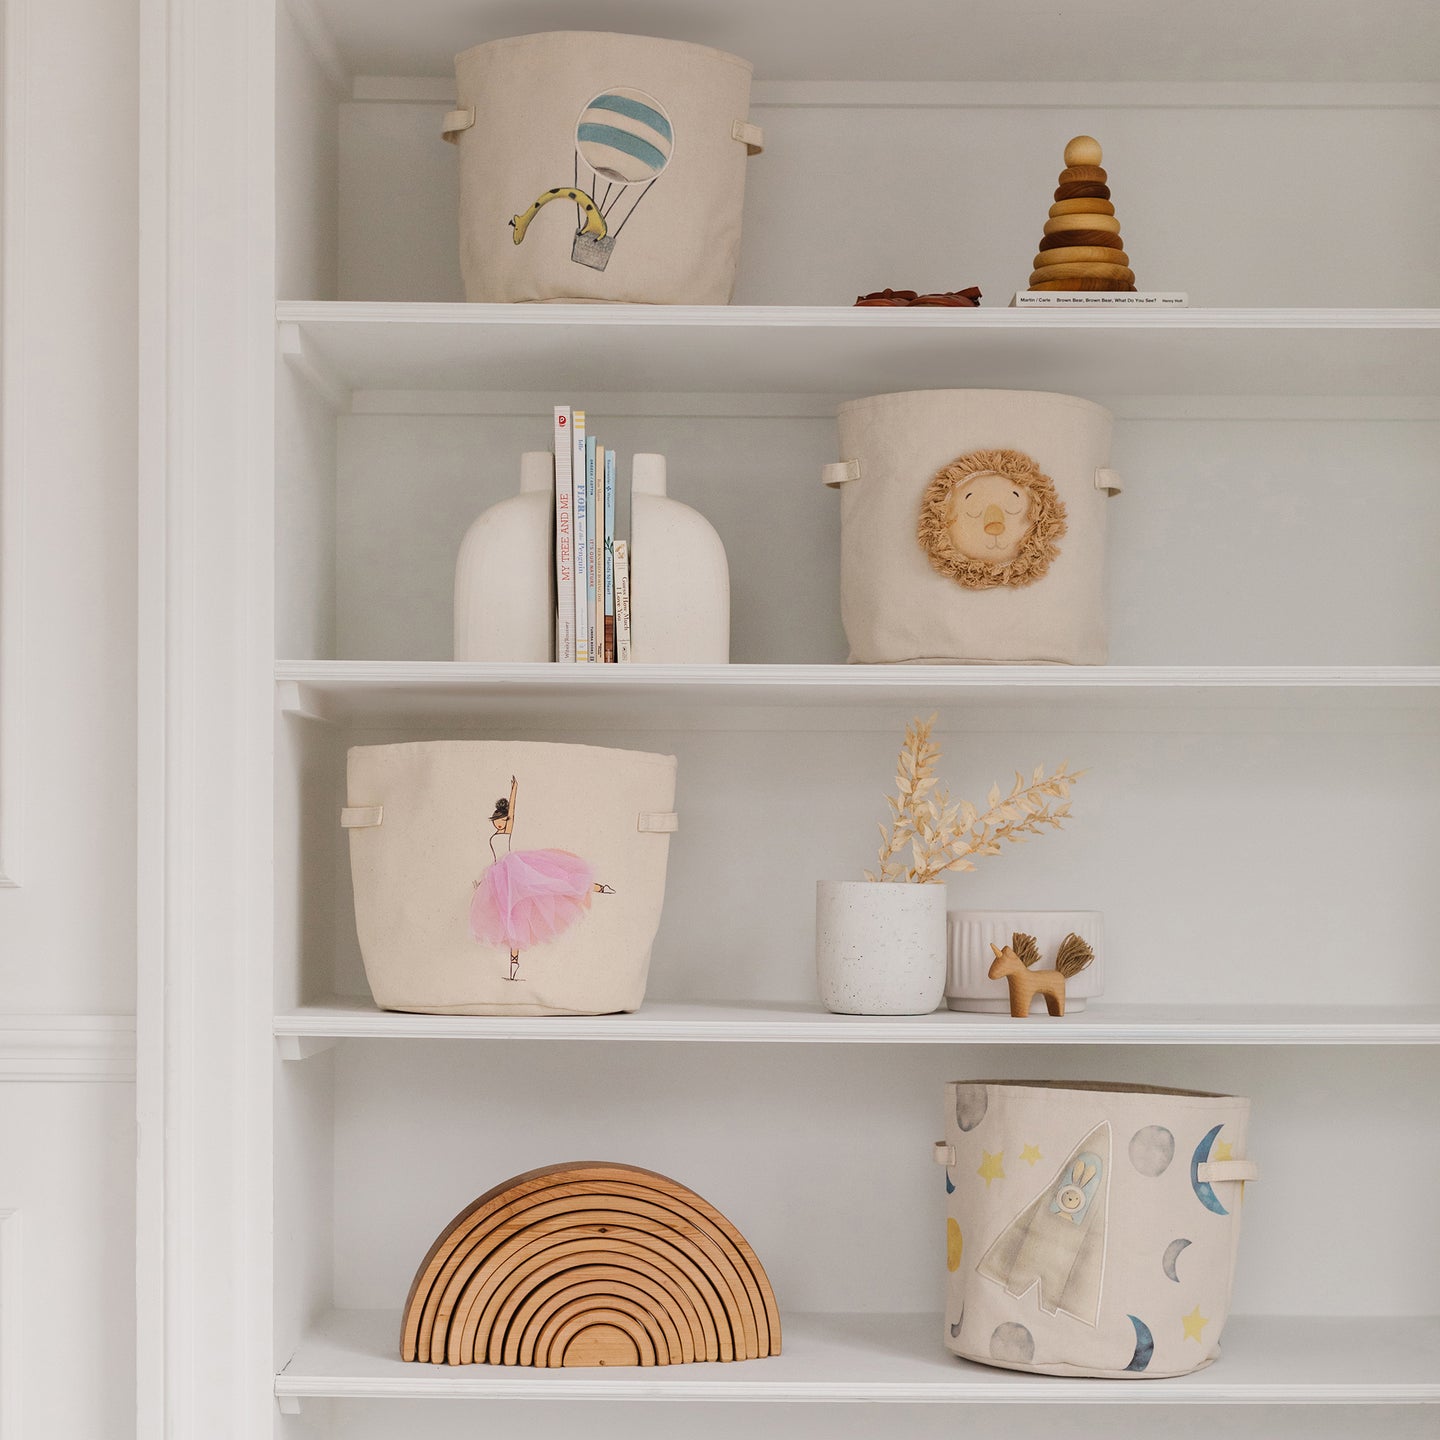 Our new storage collection is here!